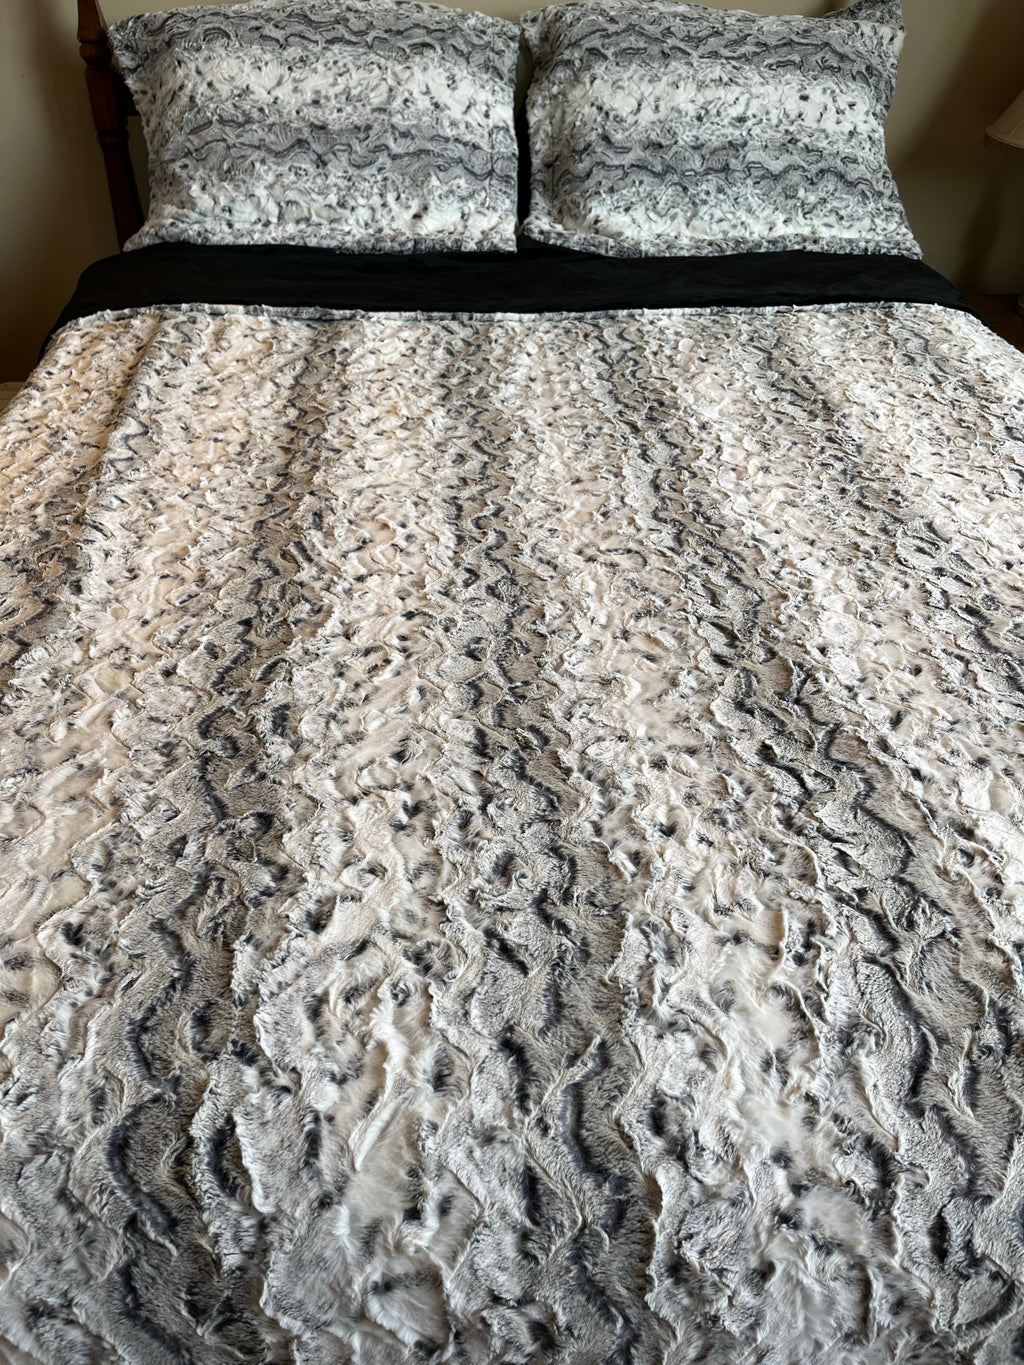 Black Snowy Owl Minky Blanket w/ Choice of Backing - Baby Size to King Size & Pillow Options